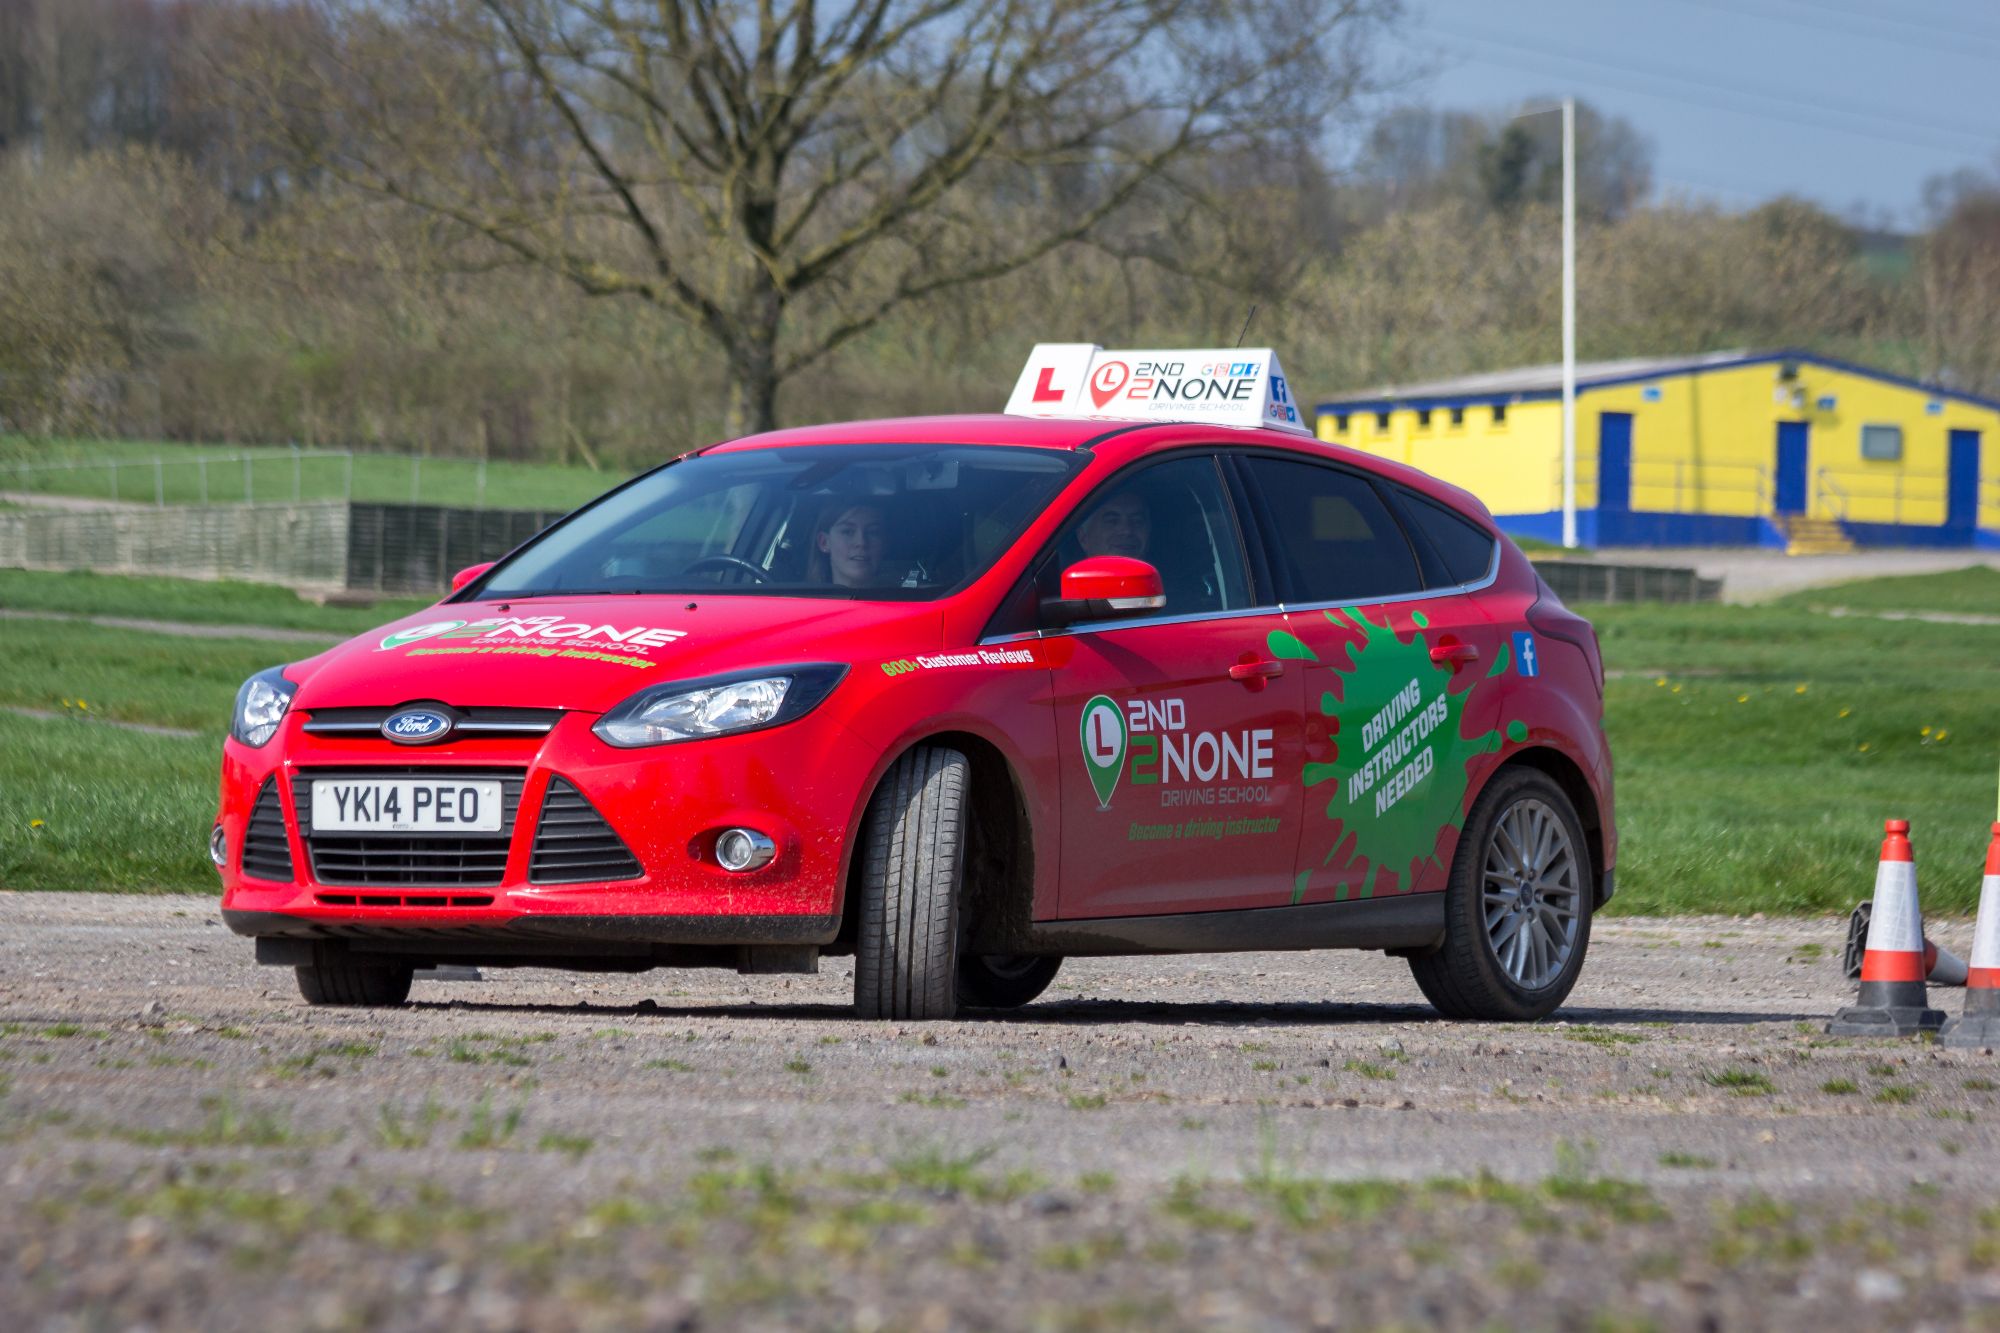 Under 17's Driving Lessons Midsomer Norton